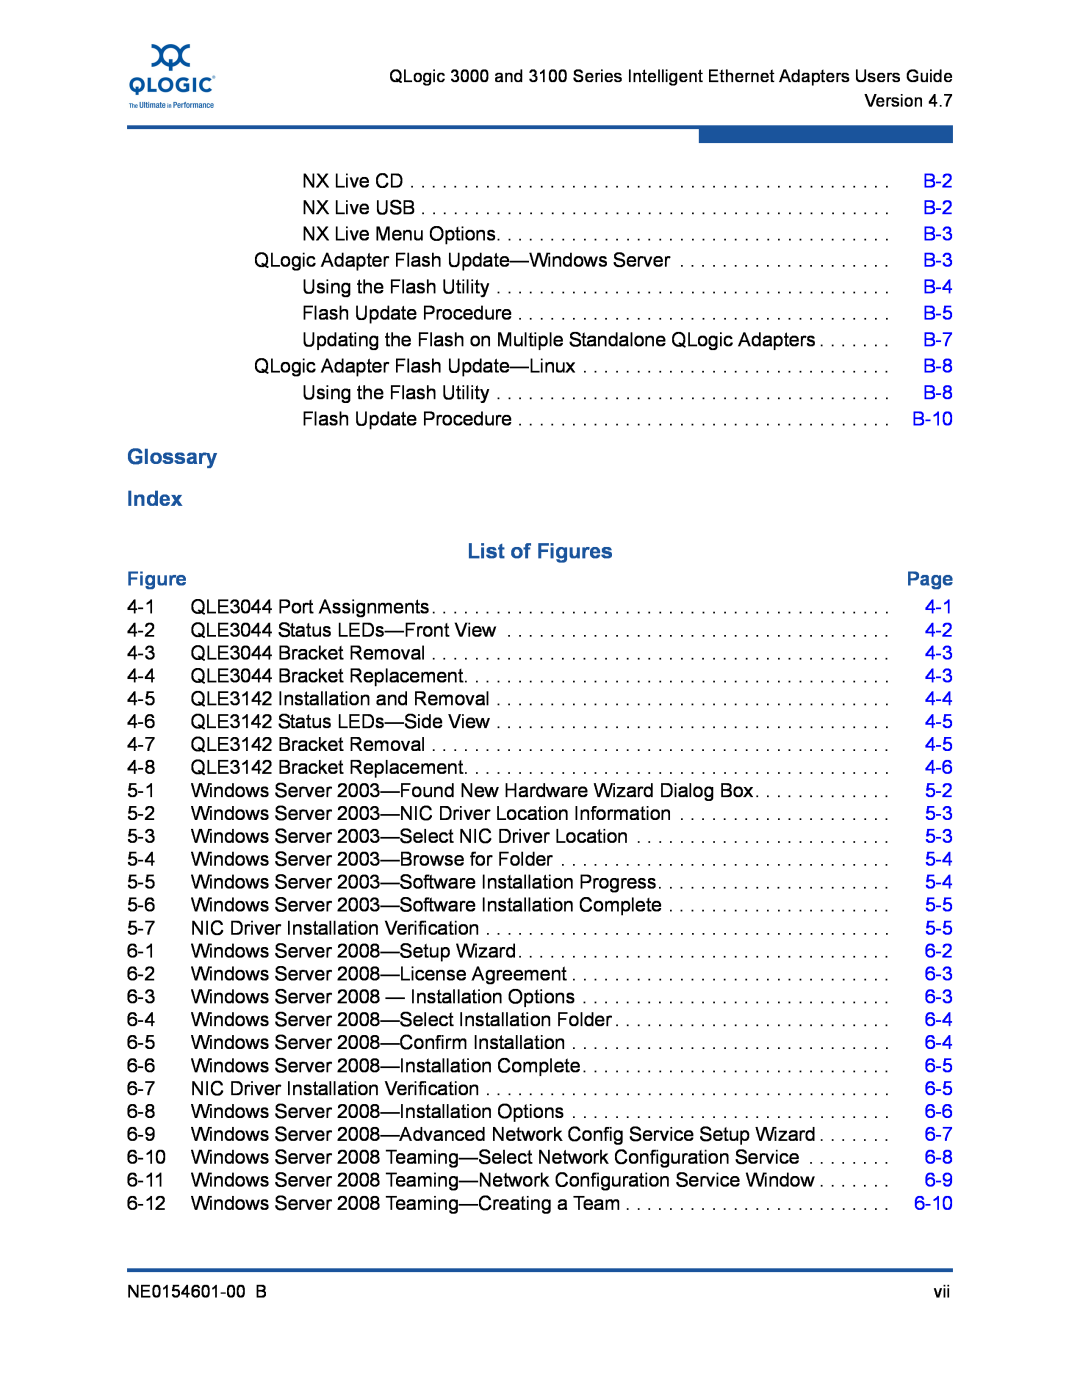 Q-Logic 3000, 3100 manual Glossary Index List of Figures, B-10, Page, 6-10 